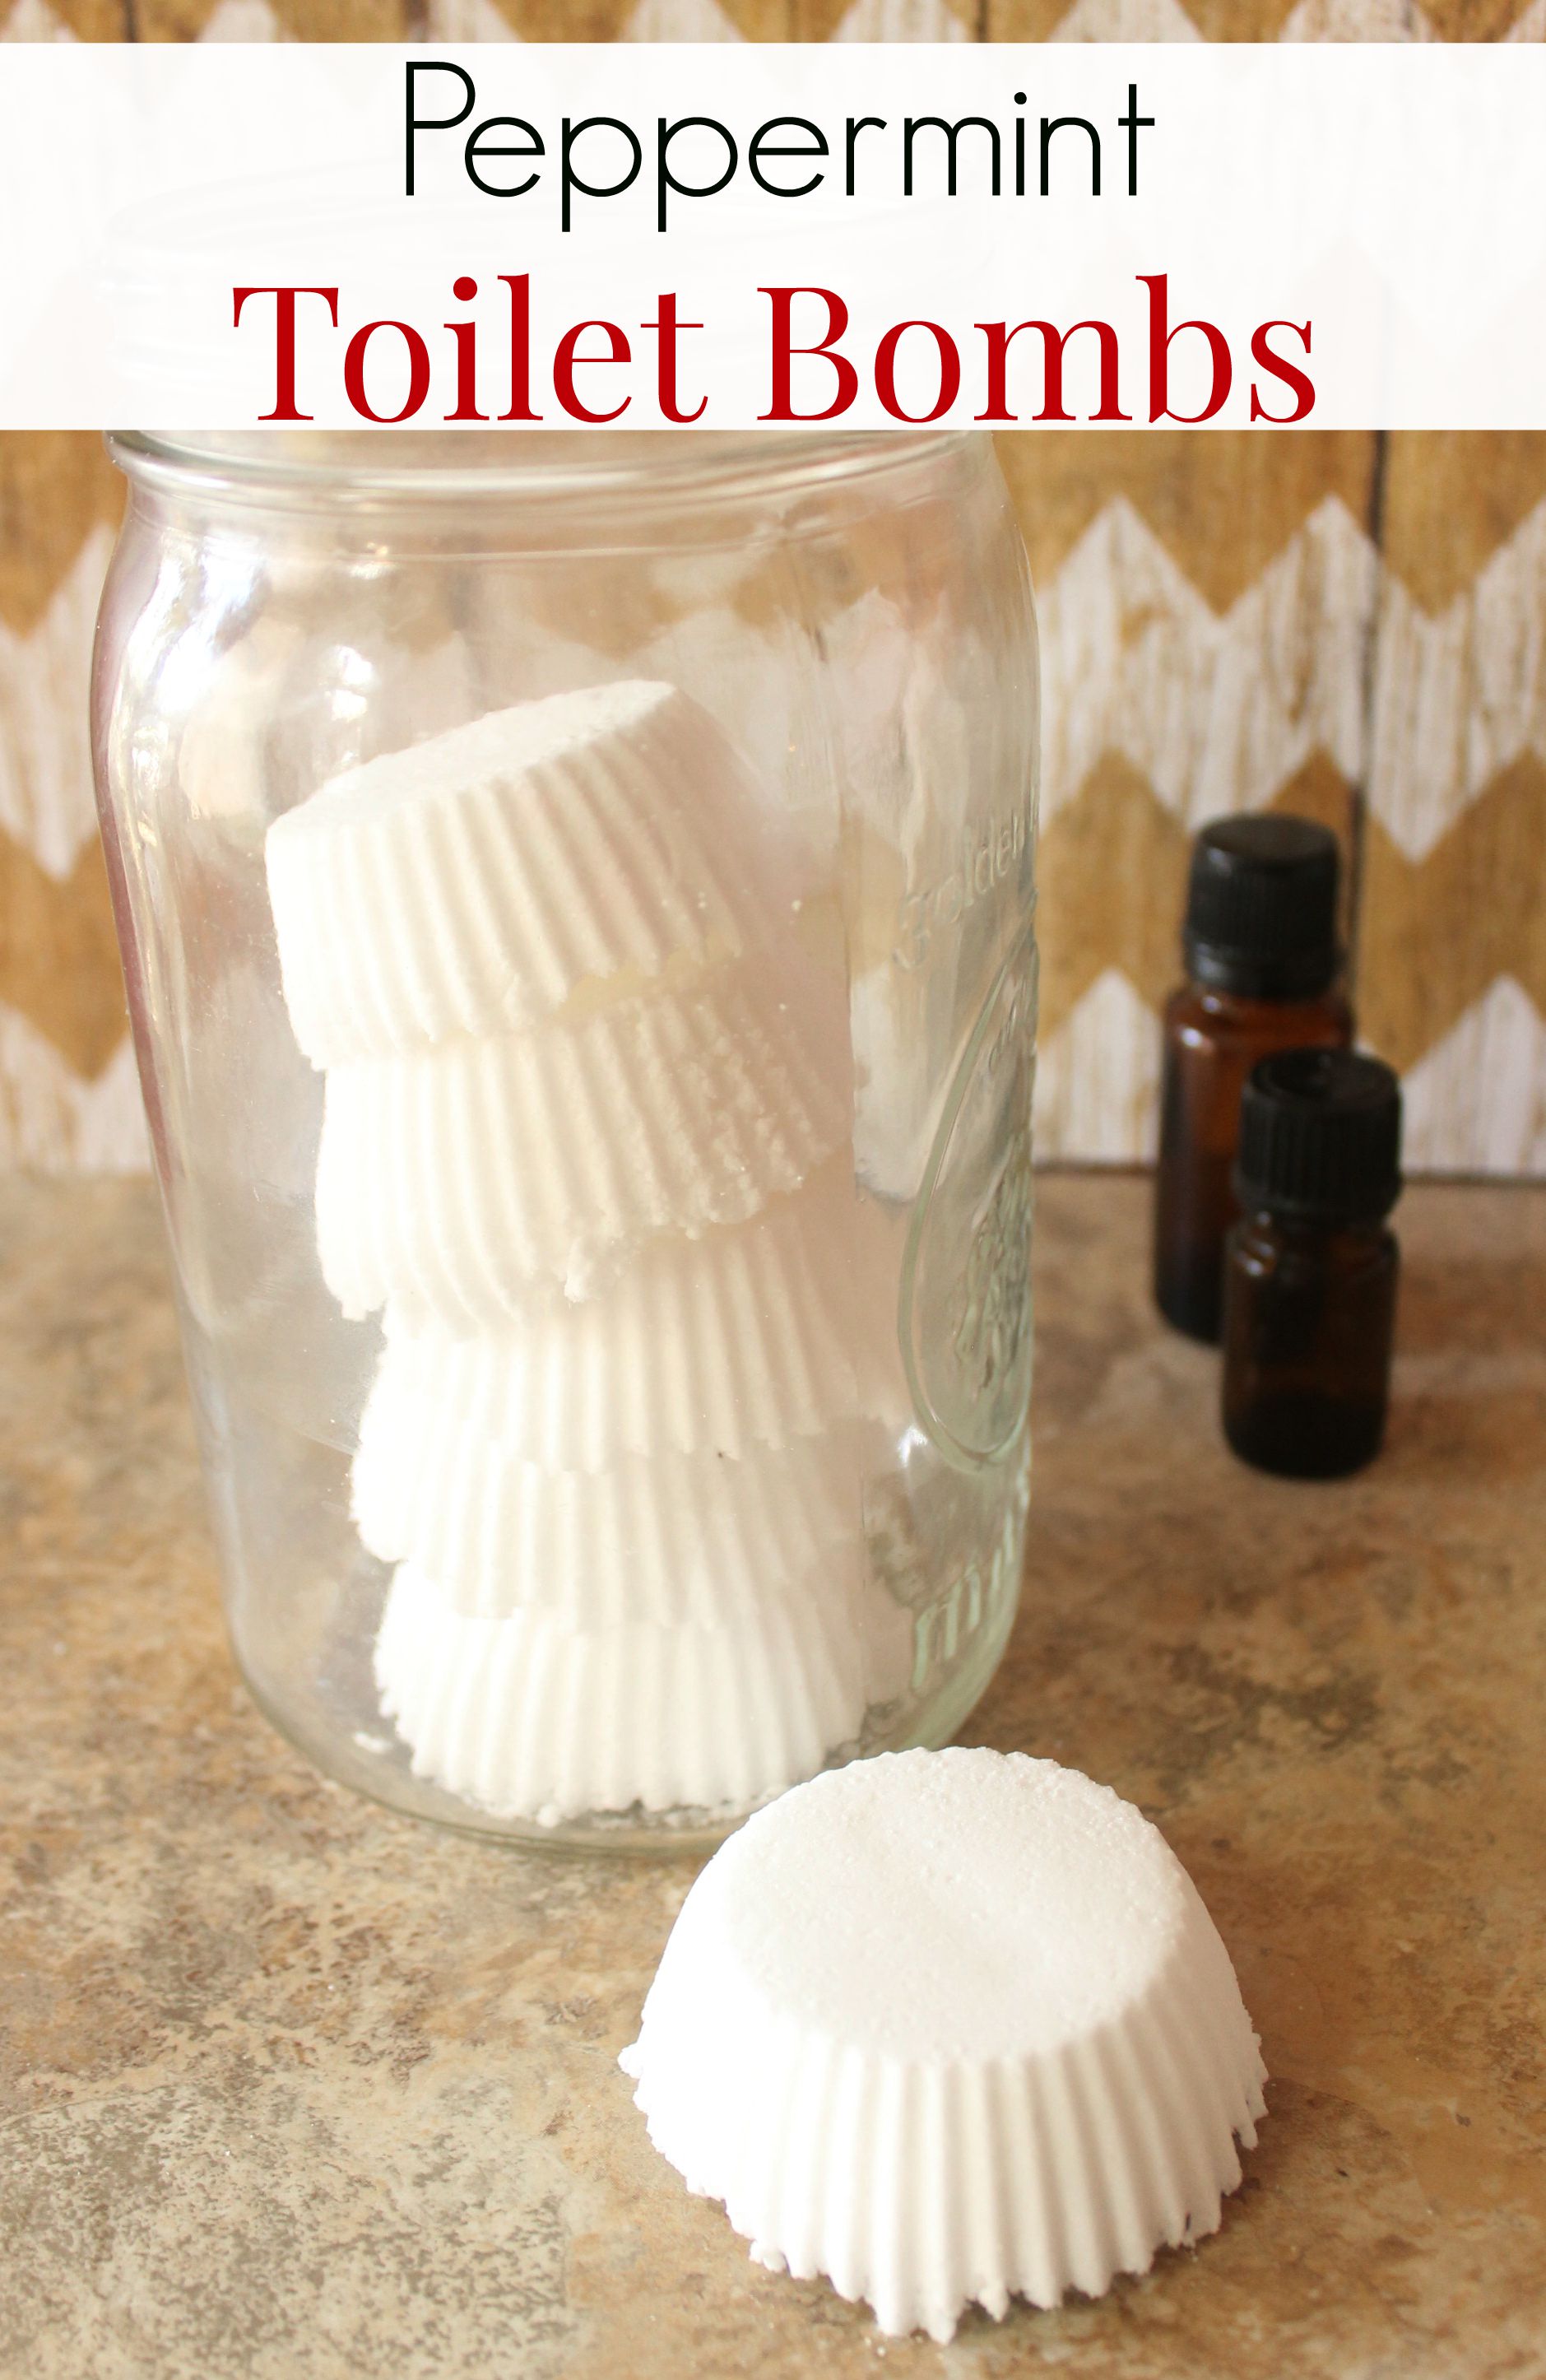 DIY Peppermint Toilet Bombs Recipe and